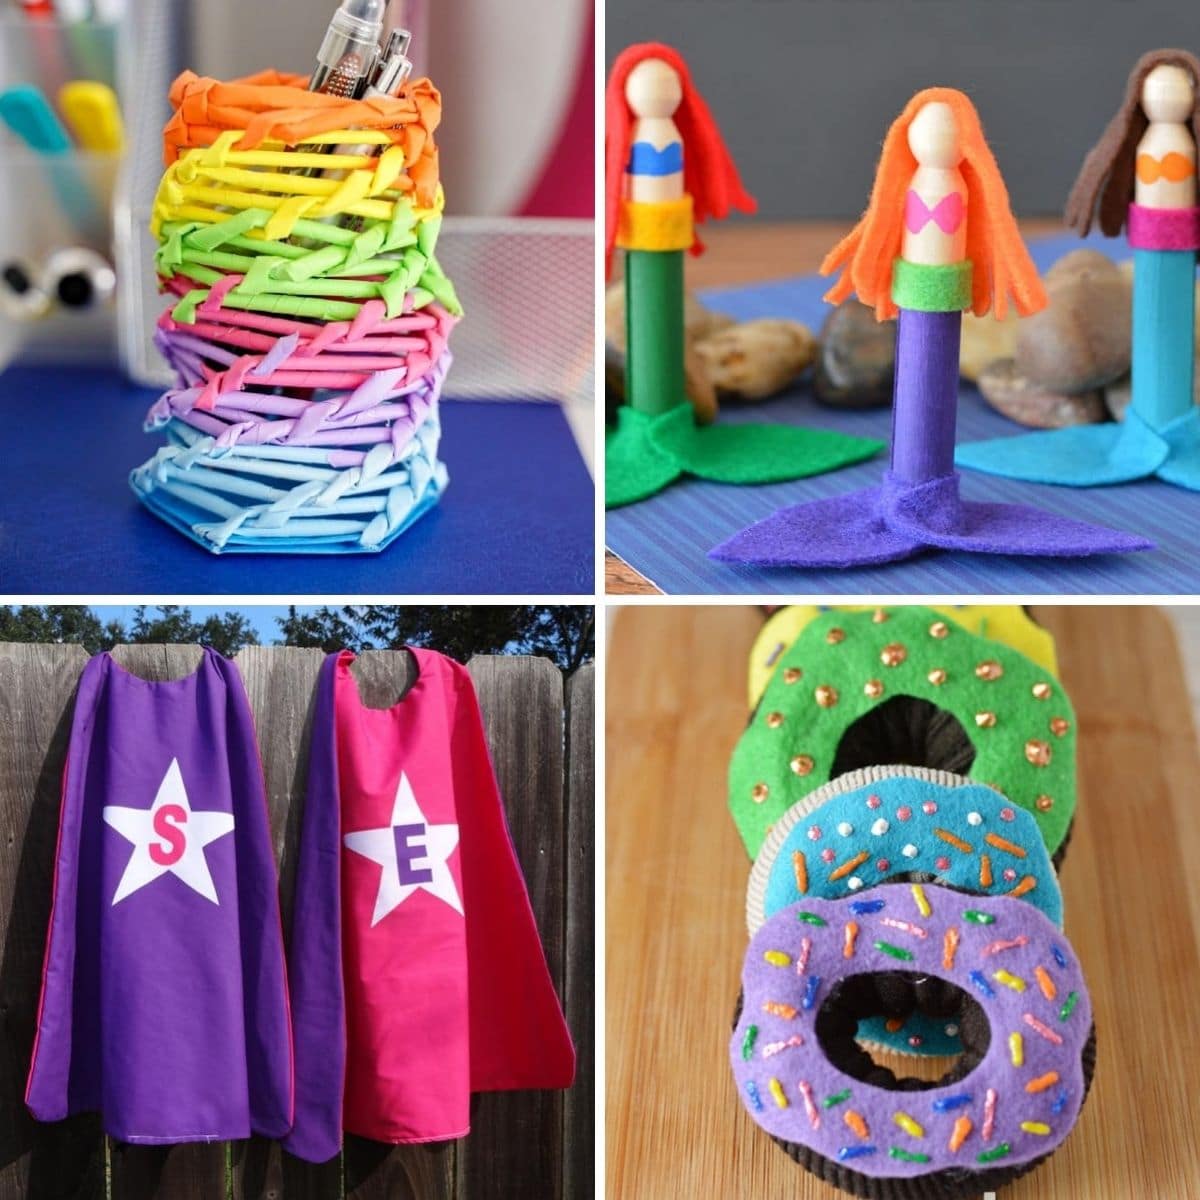 35+ Adorable DIY Gift Ideas for Kids of All Ages - DIY & Crafts